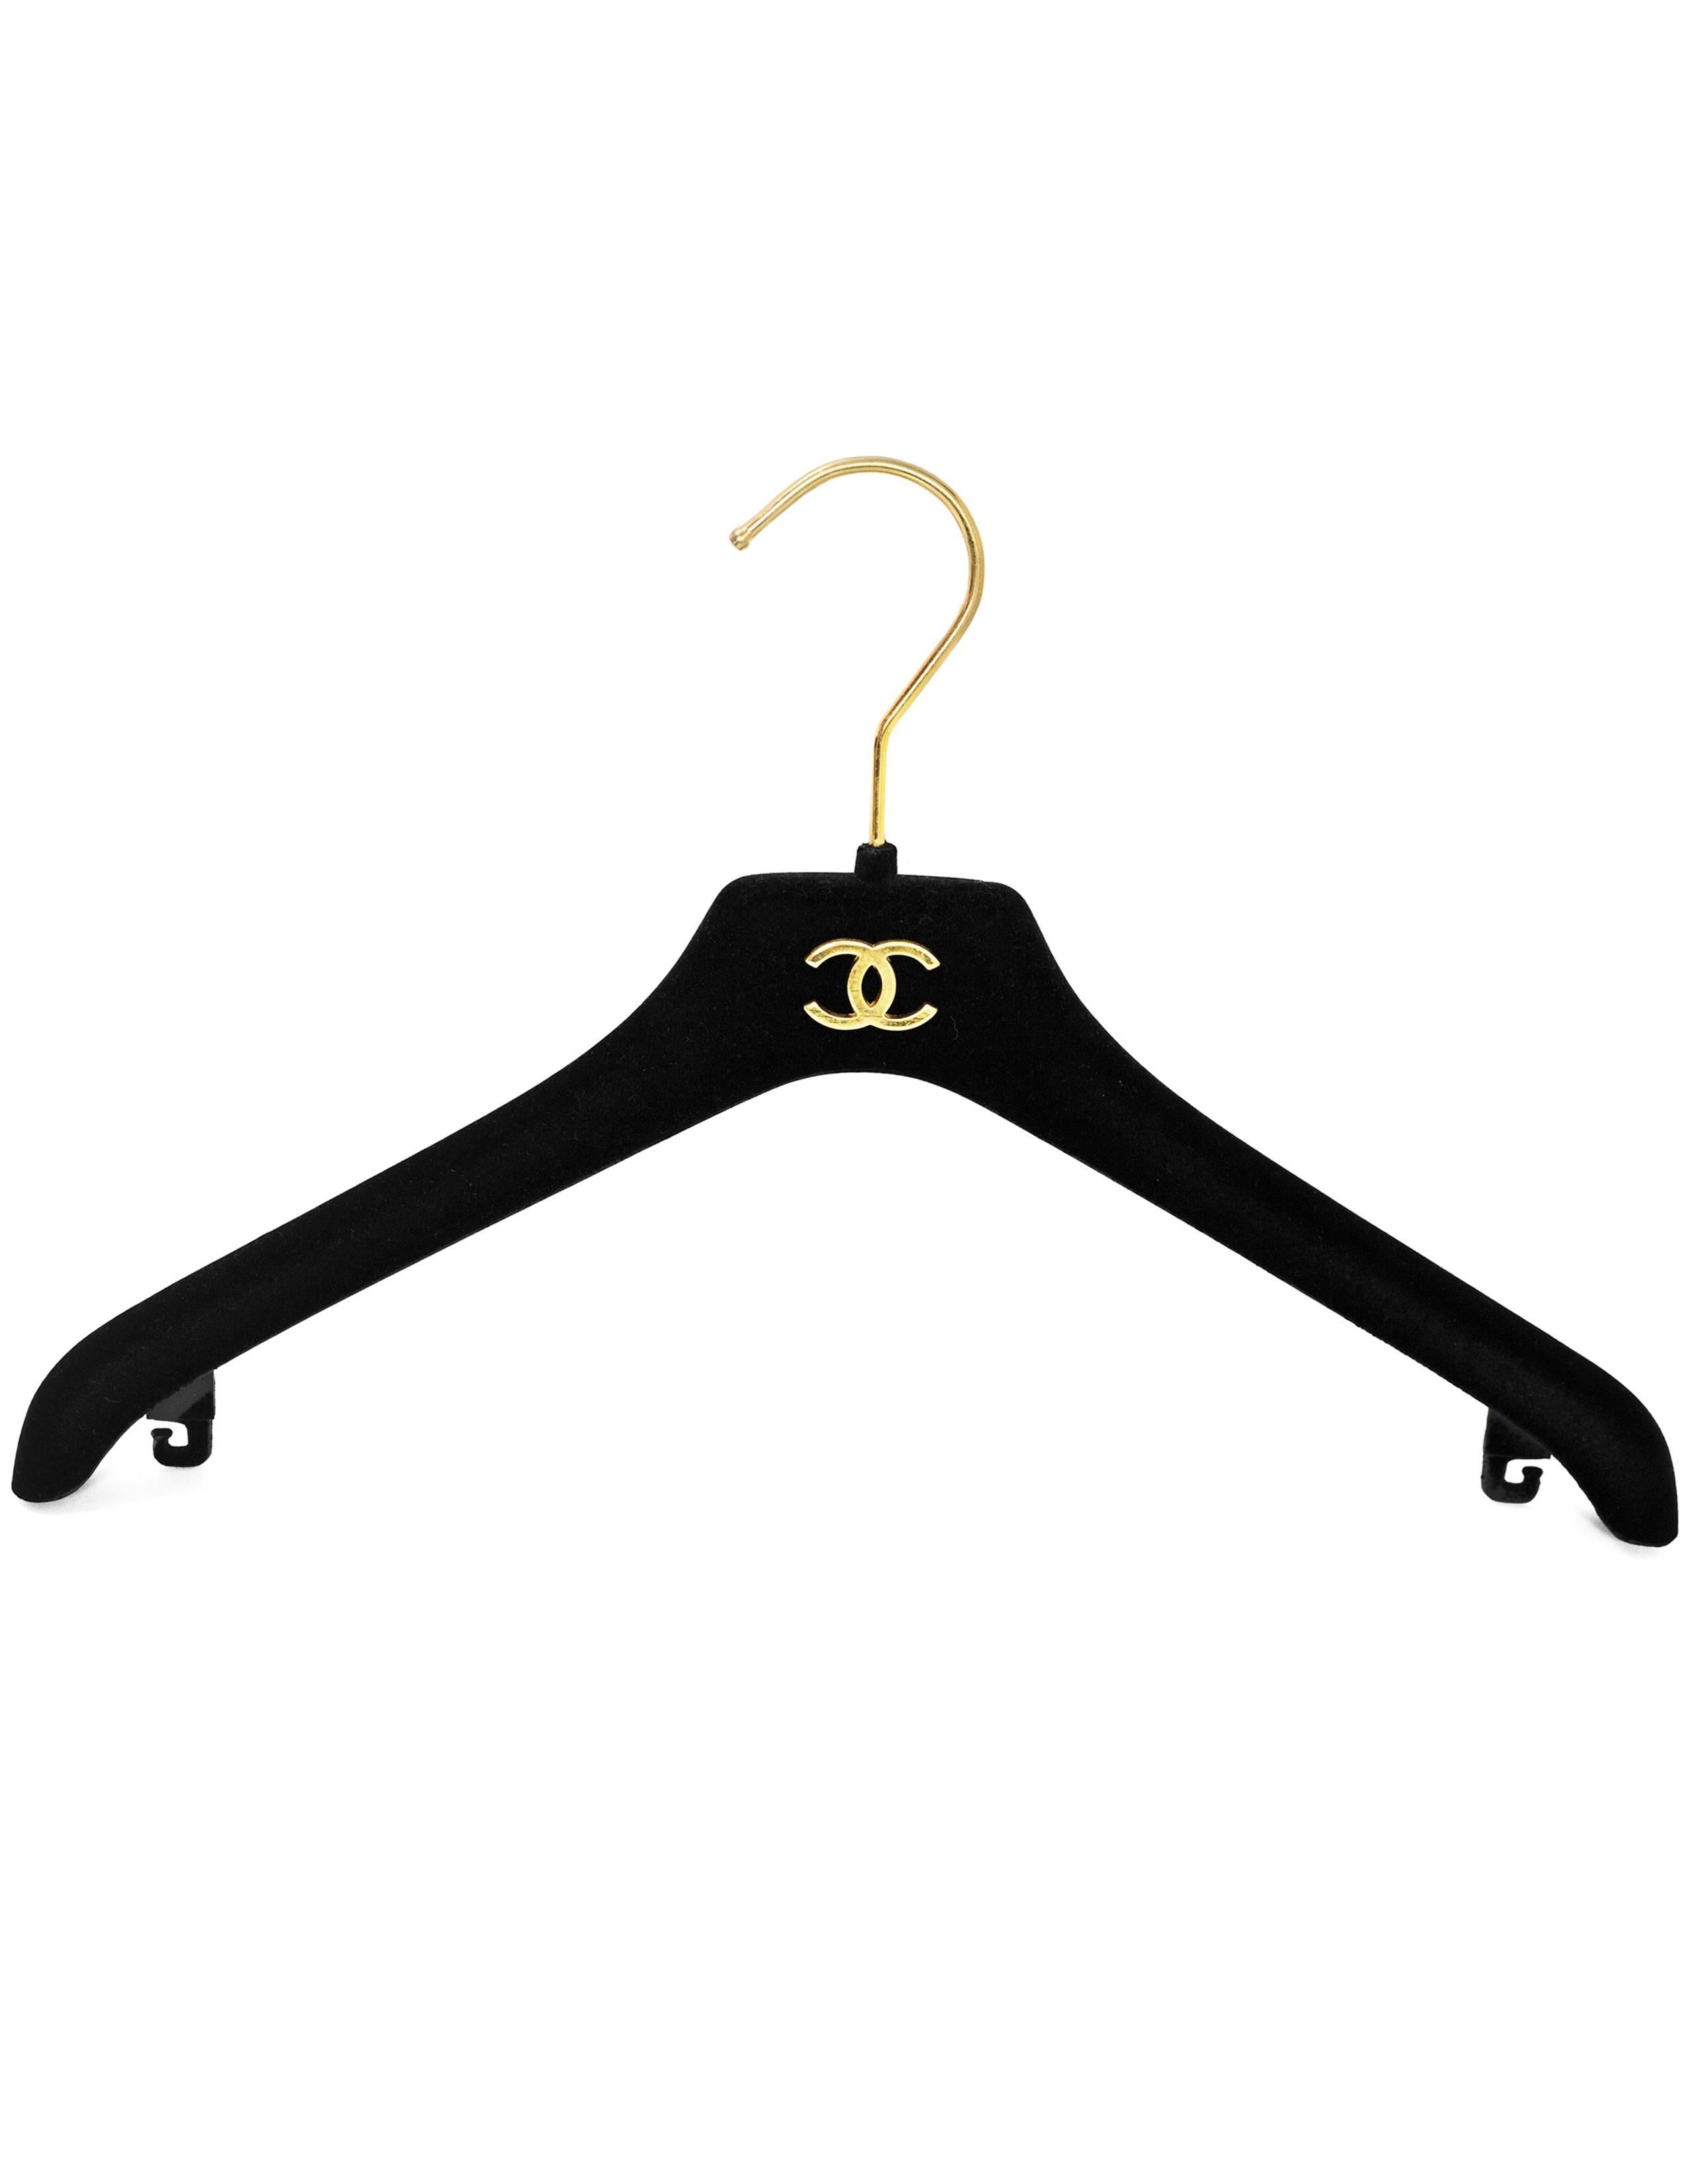 Chanel Black Velvet Coat Hangers- Set of 4 
Features goldtone CC emblem on hanger- Comes with 4 jacket hangers

Color: Black
Materials: Metal, velvet and resin
Overall Condition: Excellent pre-owned condition light tarnish at hardware
Includes: Four